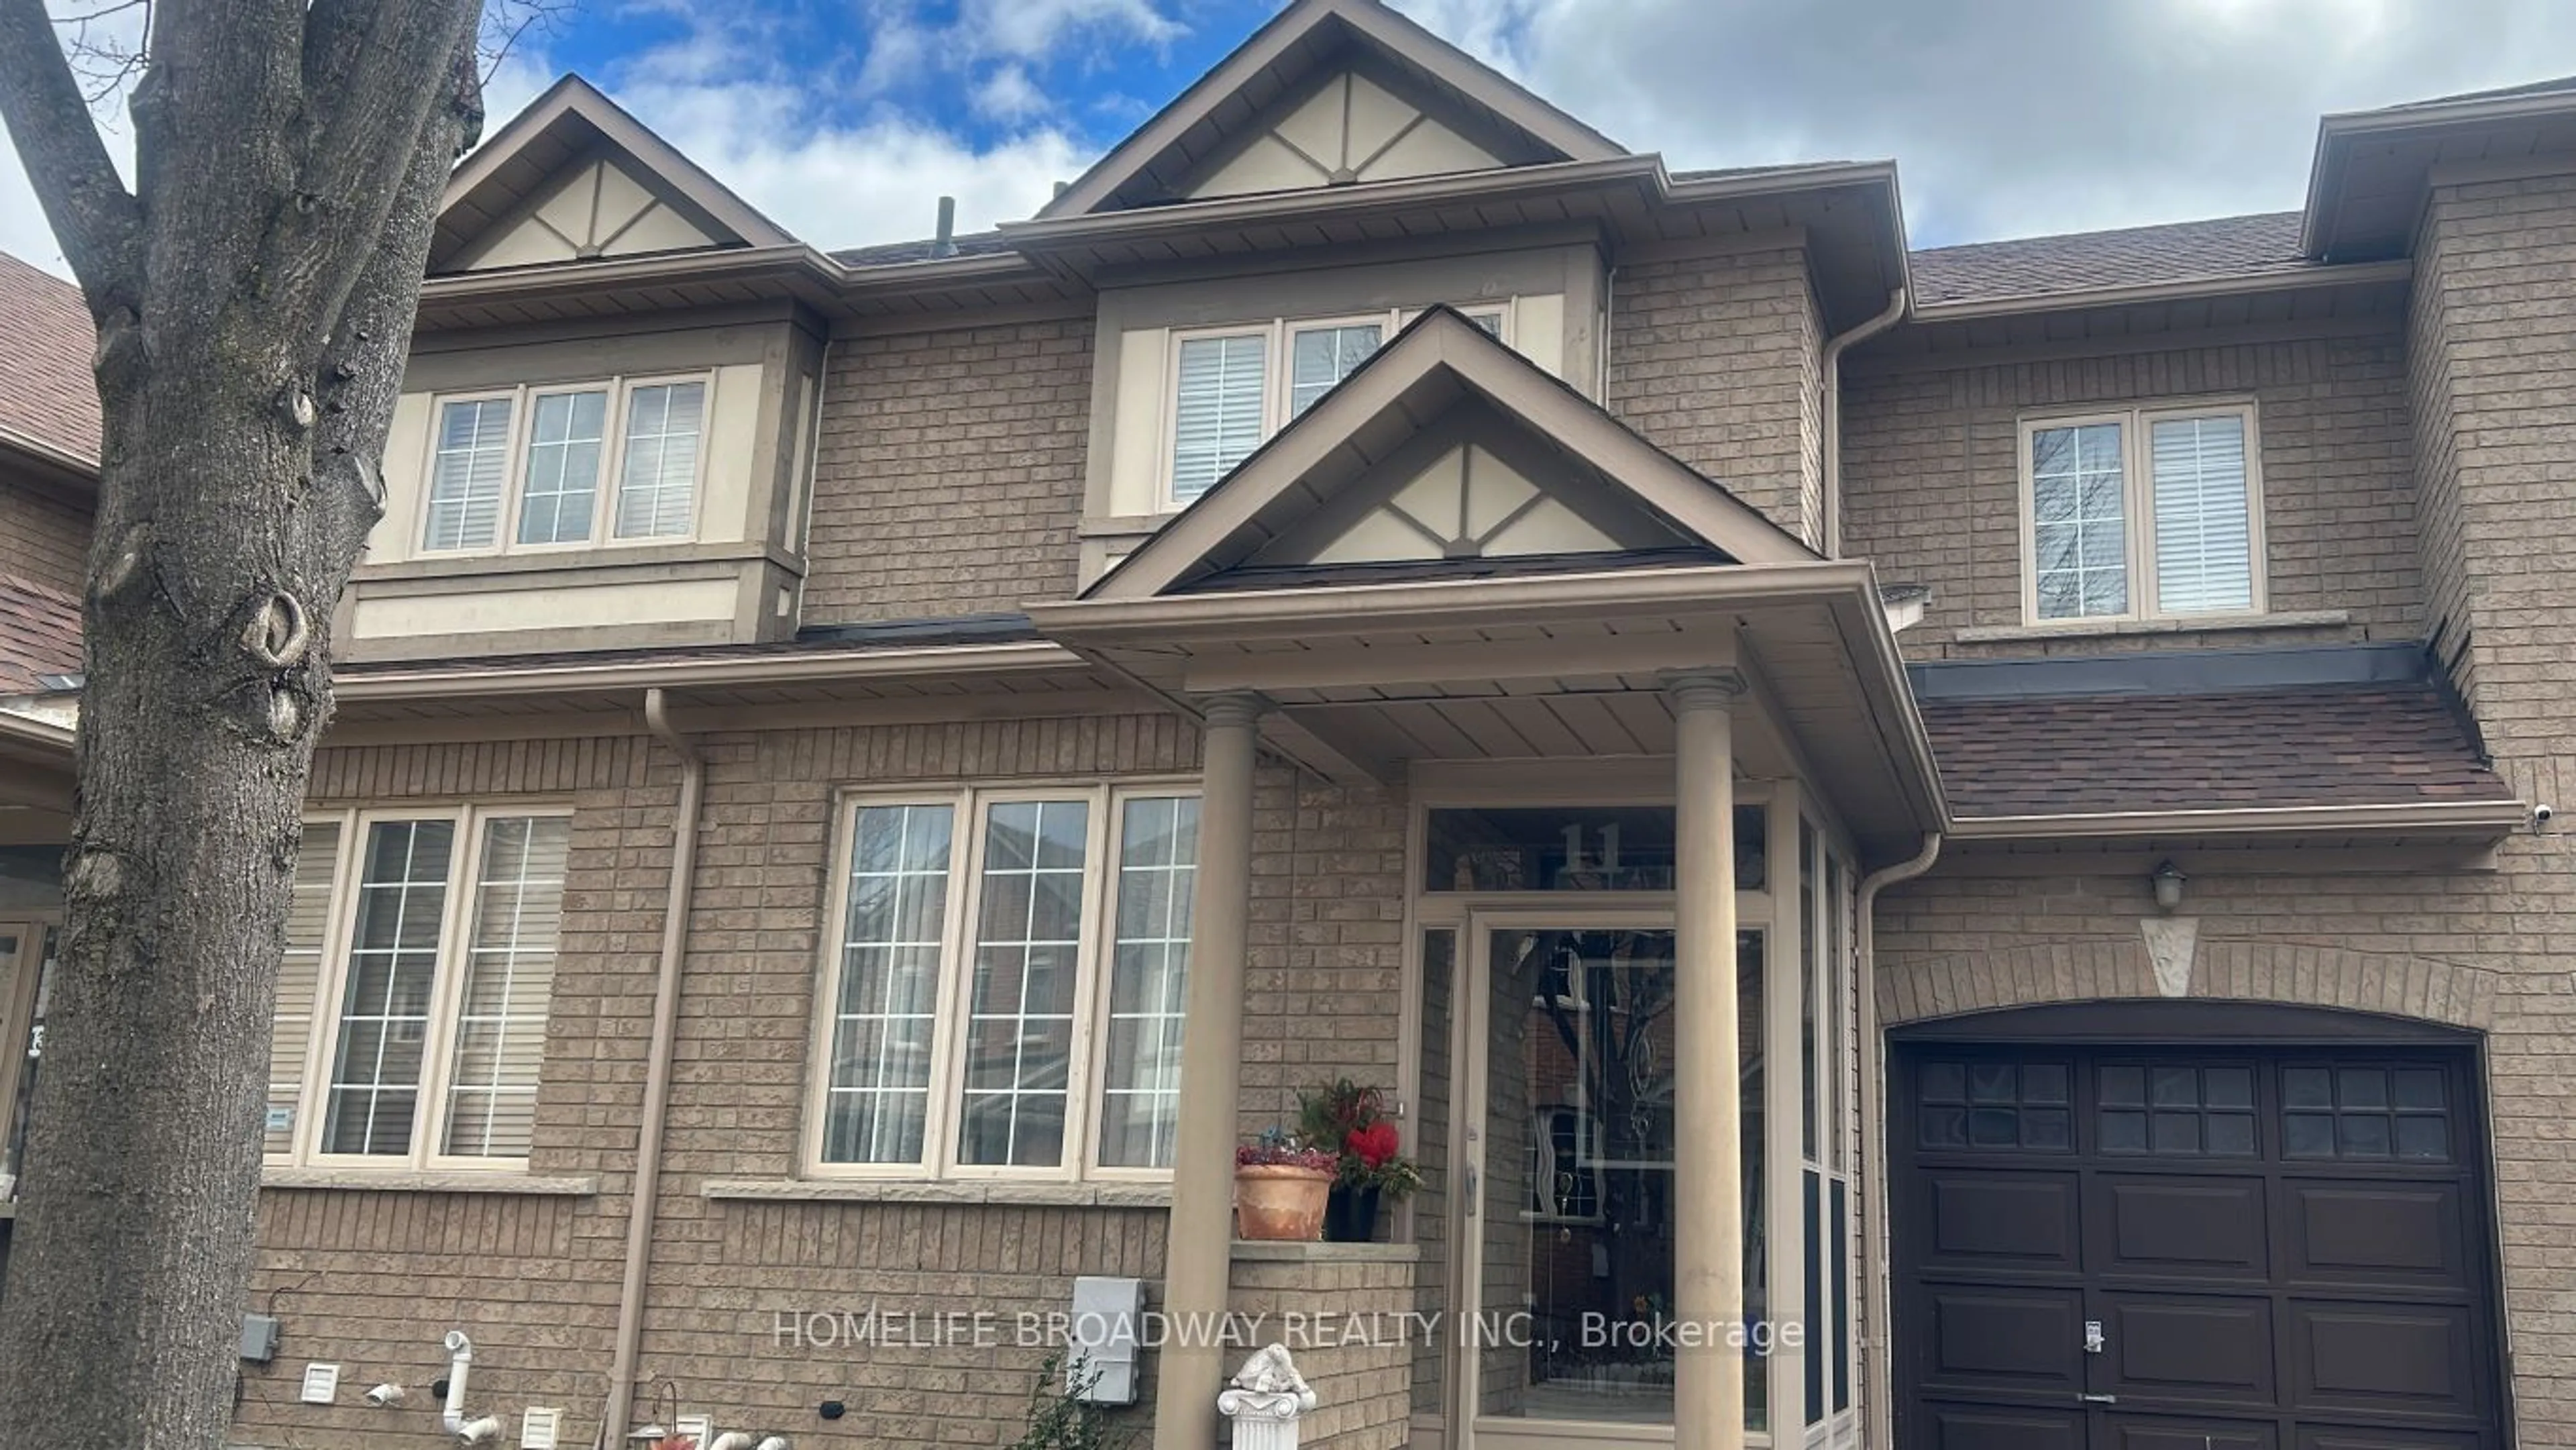 Home with brick exterior material for 11 Magnotta Rd, Markham Ontario L6C 2V5